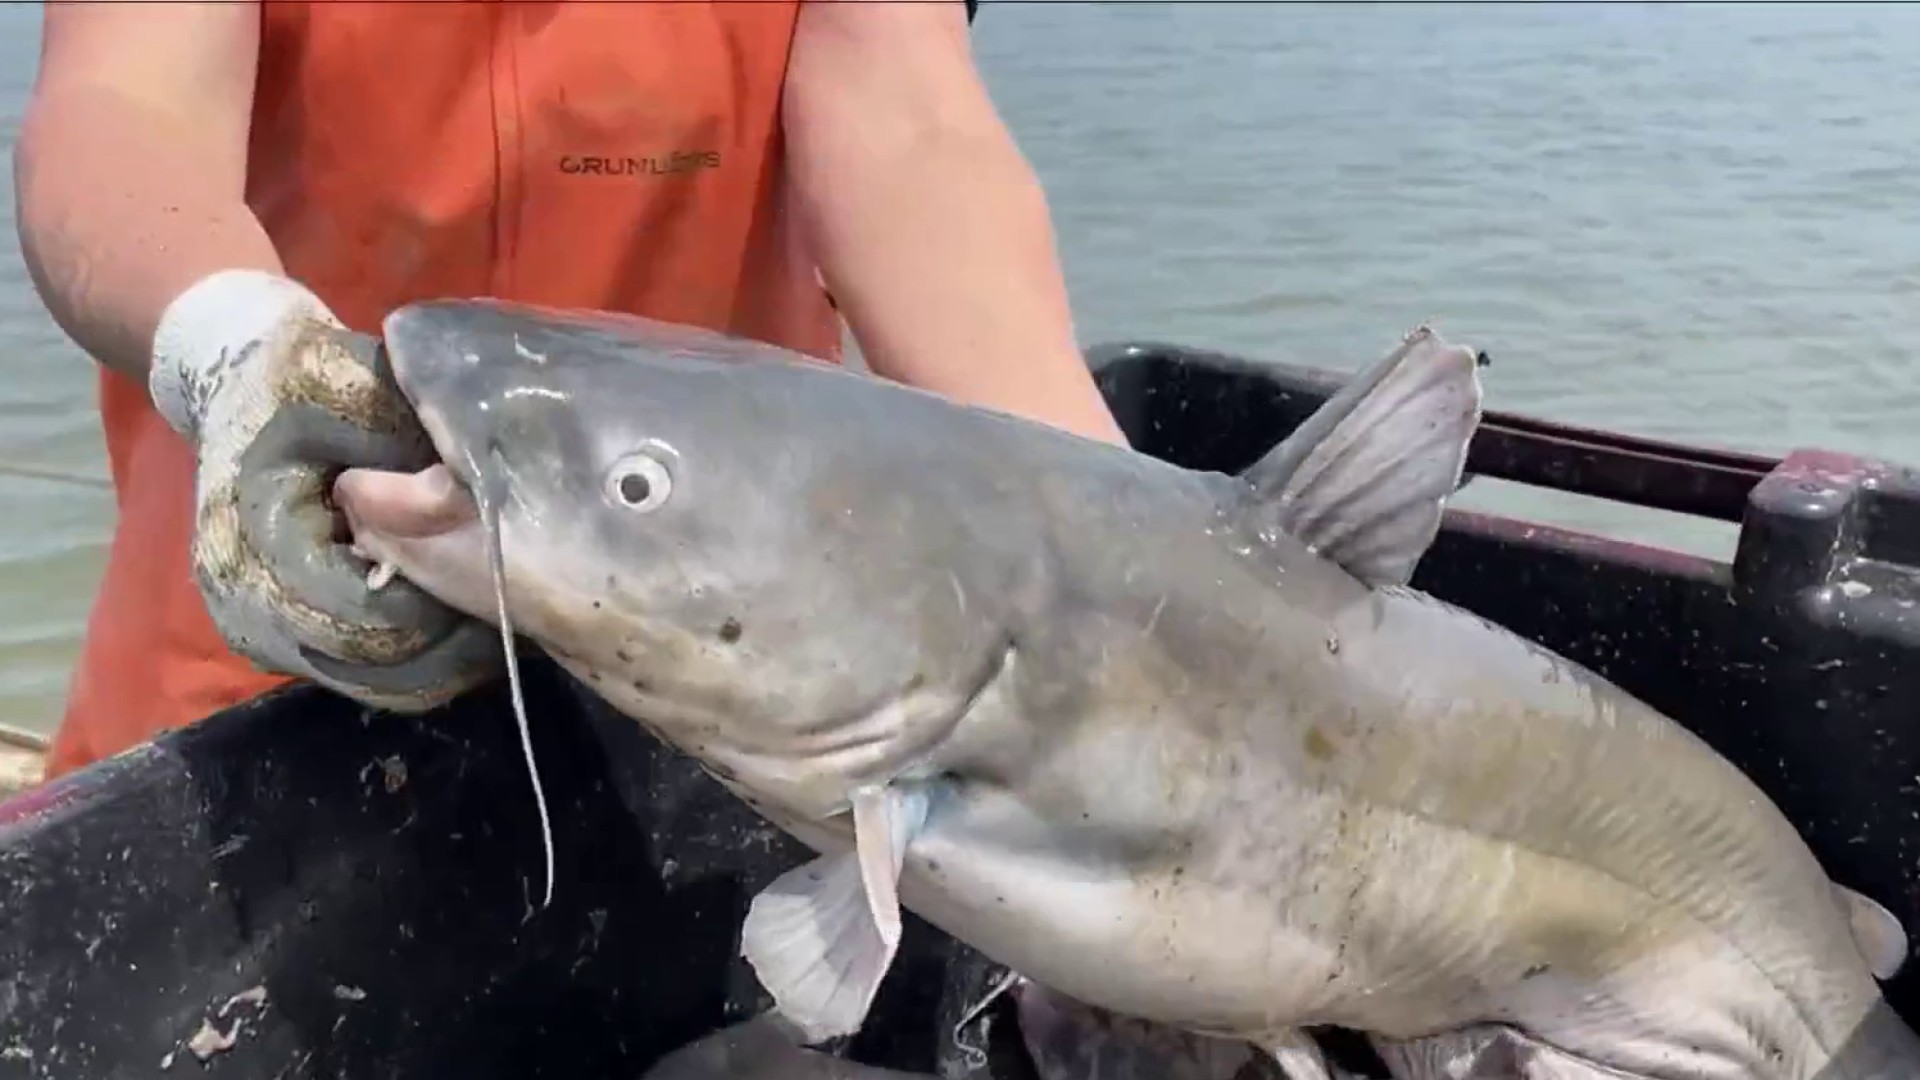 How to Catch Blue Catfish